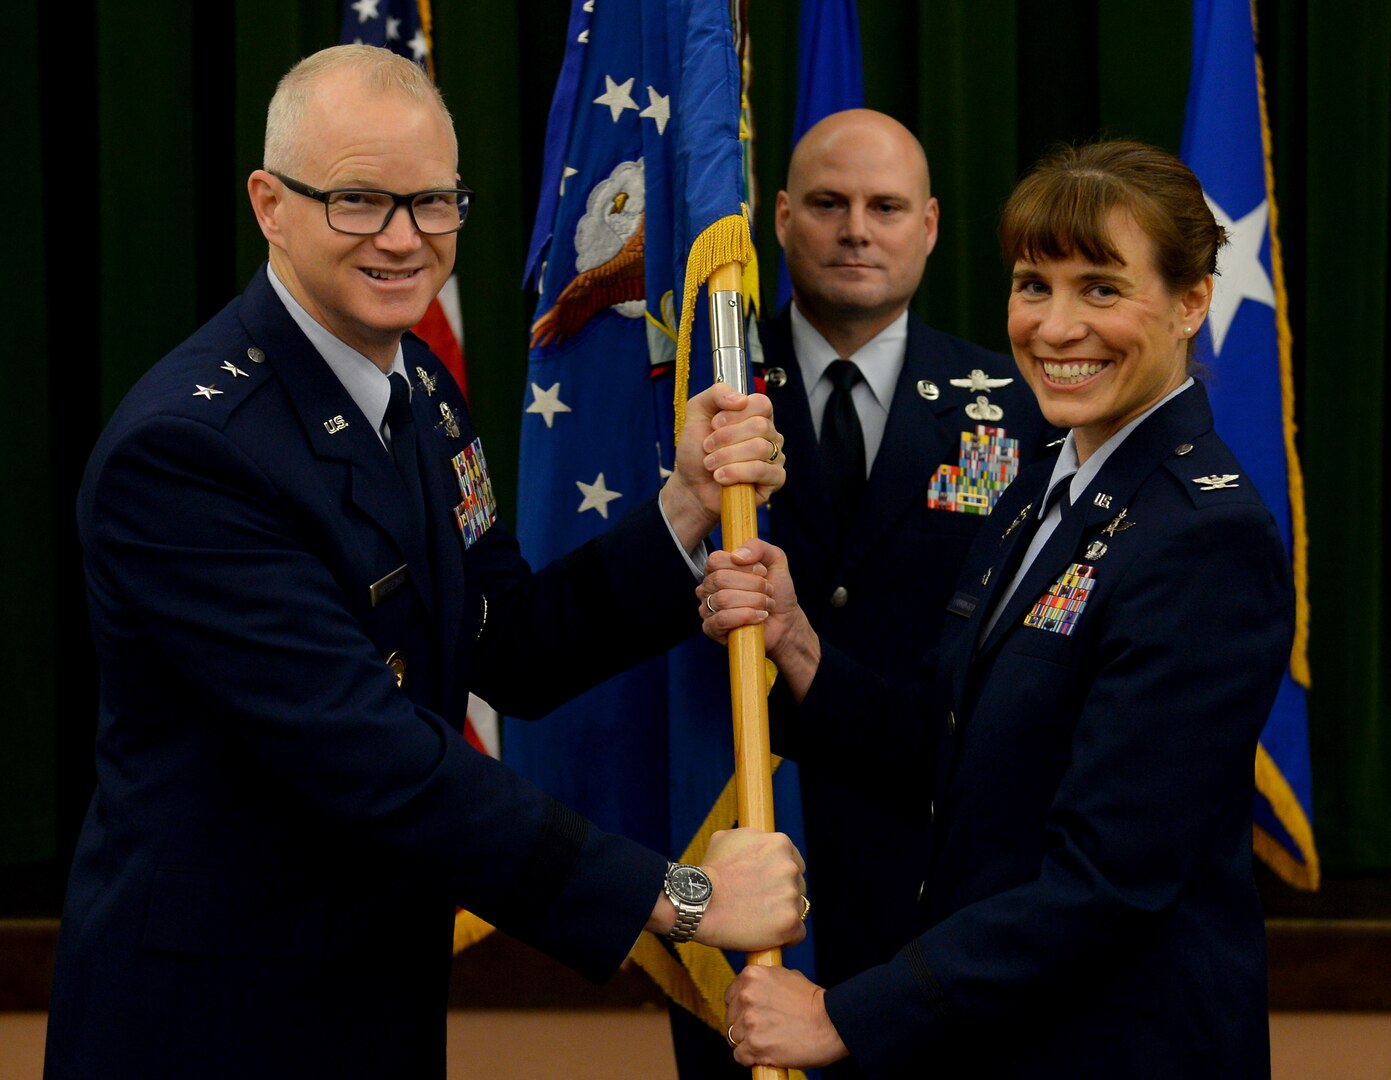 Maj. Gen. Chris Weggeman, Air Forces Cyber commander, presents the 67th Cyberspace Wing guidon to Col. Melissa Cunningham, 67th CW commander, during the wing’s change of command ceremony at Joint Base San Antonio-Lackland, Texas, June 20, 2018. Col. Bradley Pyburn relinquished command of the wing to Cunningham. (U.S. Air Force photo by Tech. Sgt. R.J. Biermann)